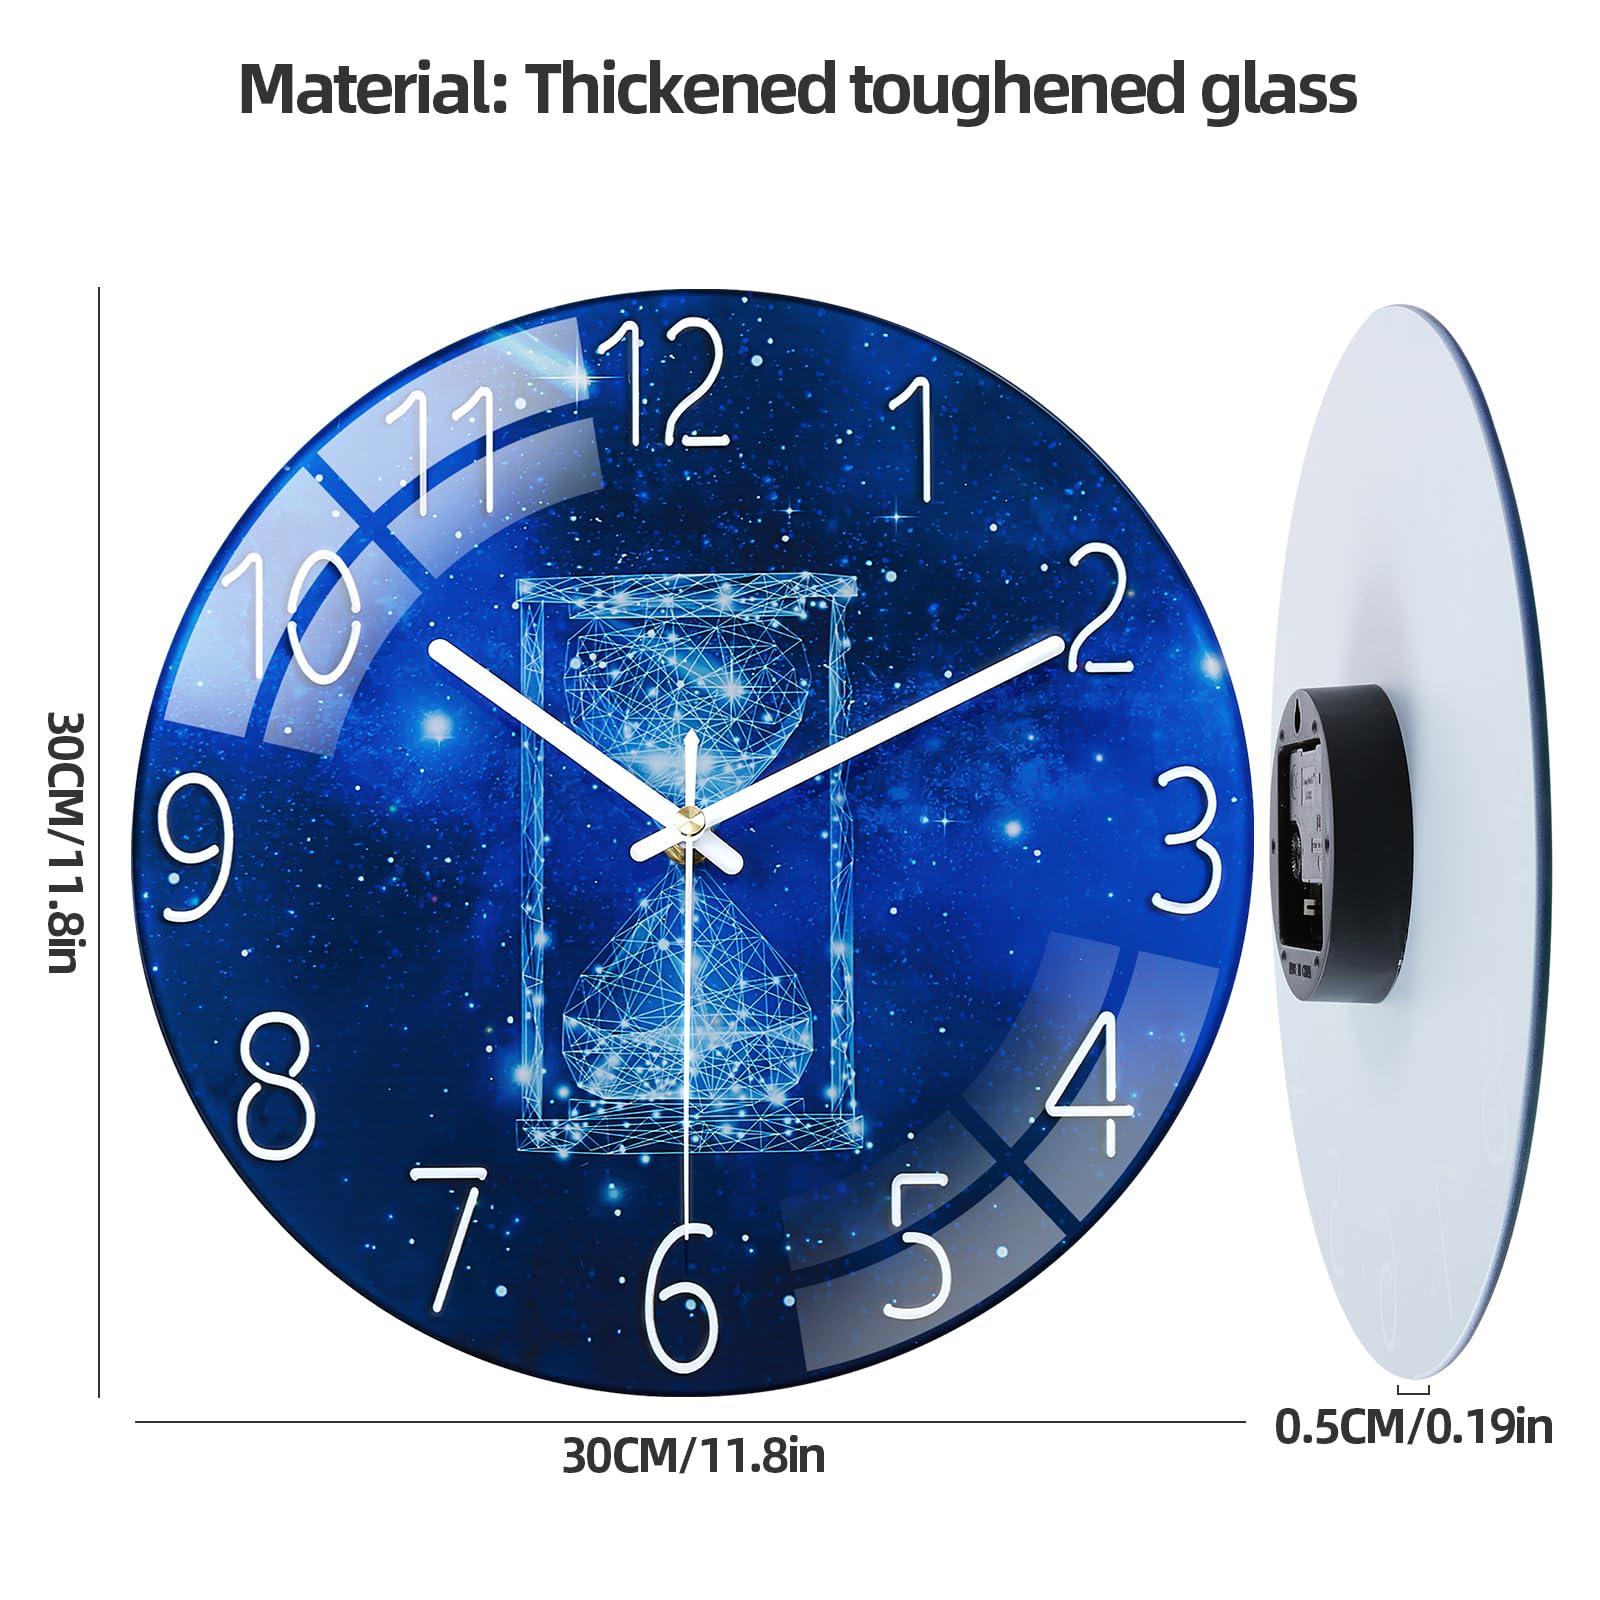 Warmiehomy Modern Glass Wall Clock 12 Inch Kitchen Wall Clocks Time Hourglass Pattern Decorative Wall Clocks for Living Room Battery Operated Silent Small Frameless Wall Clock for Bedroom Home Decor 1